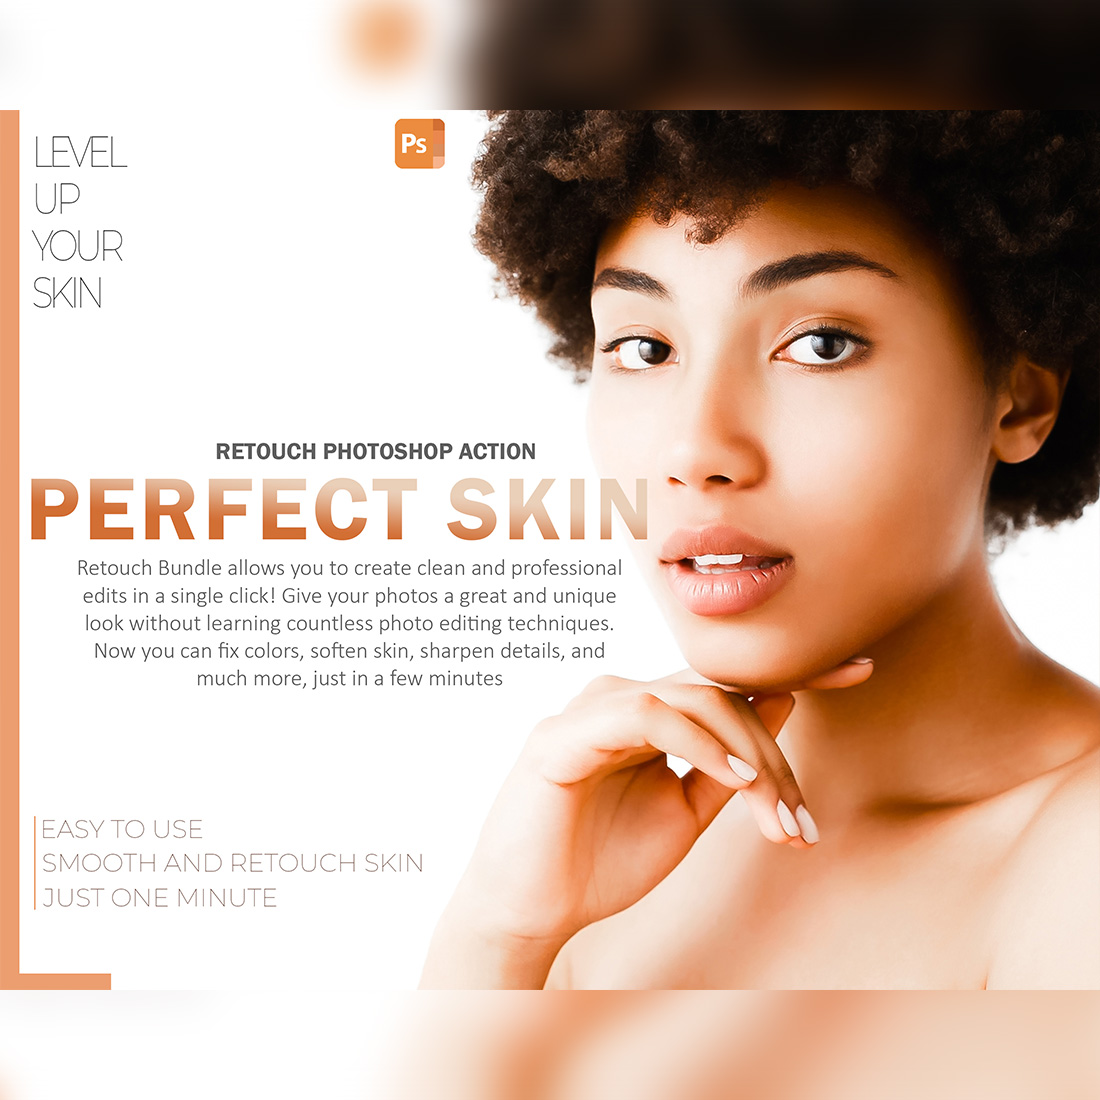 16 Photoshop Actions, Perfect Skin Ps Action, Makeup ACR Preset, Retouch Ps Filter, Atn Portrait And Lifestyle Theme For Instagram, Blogger cover image.